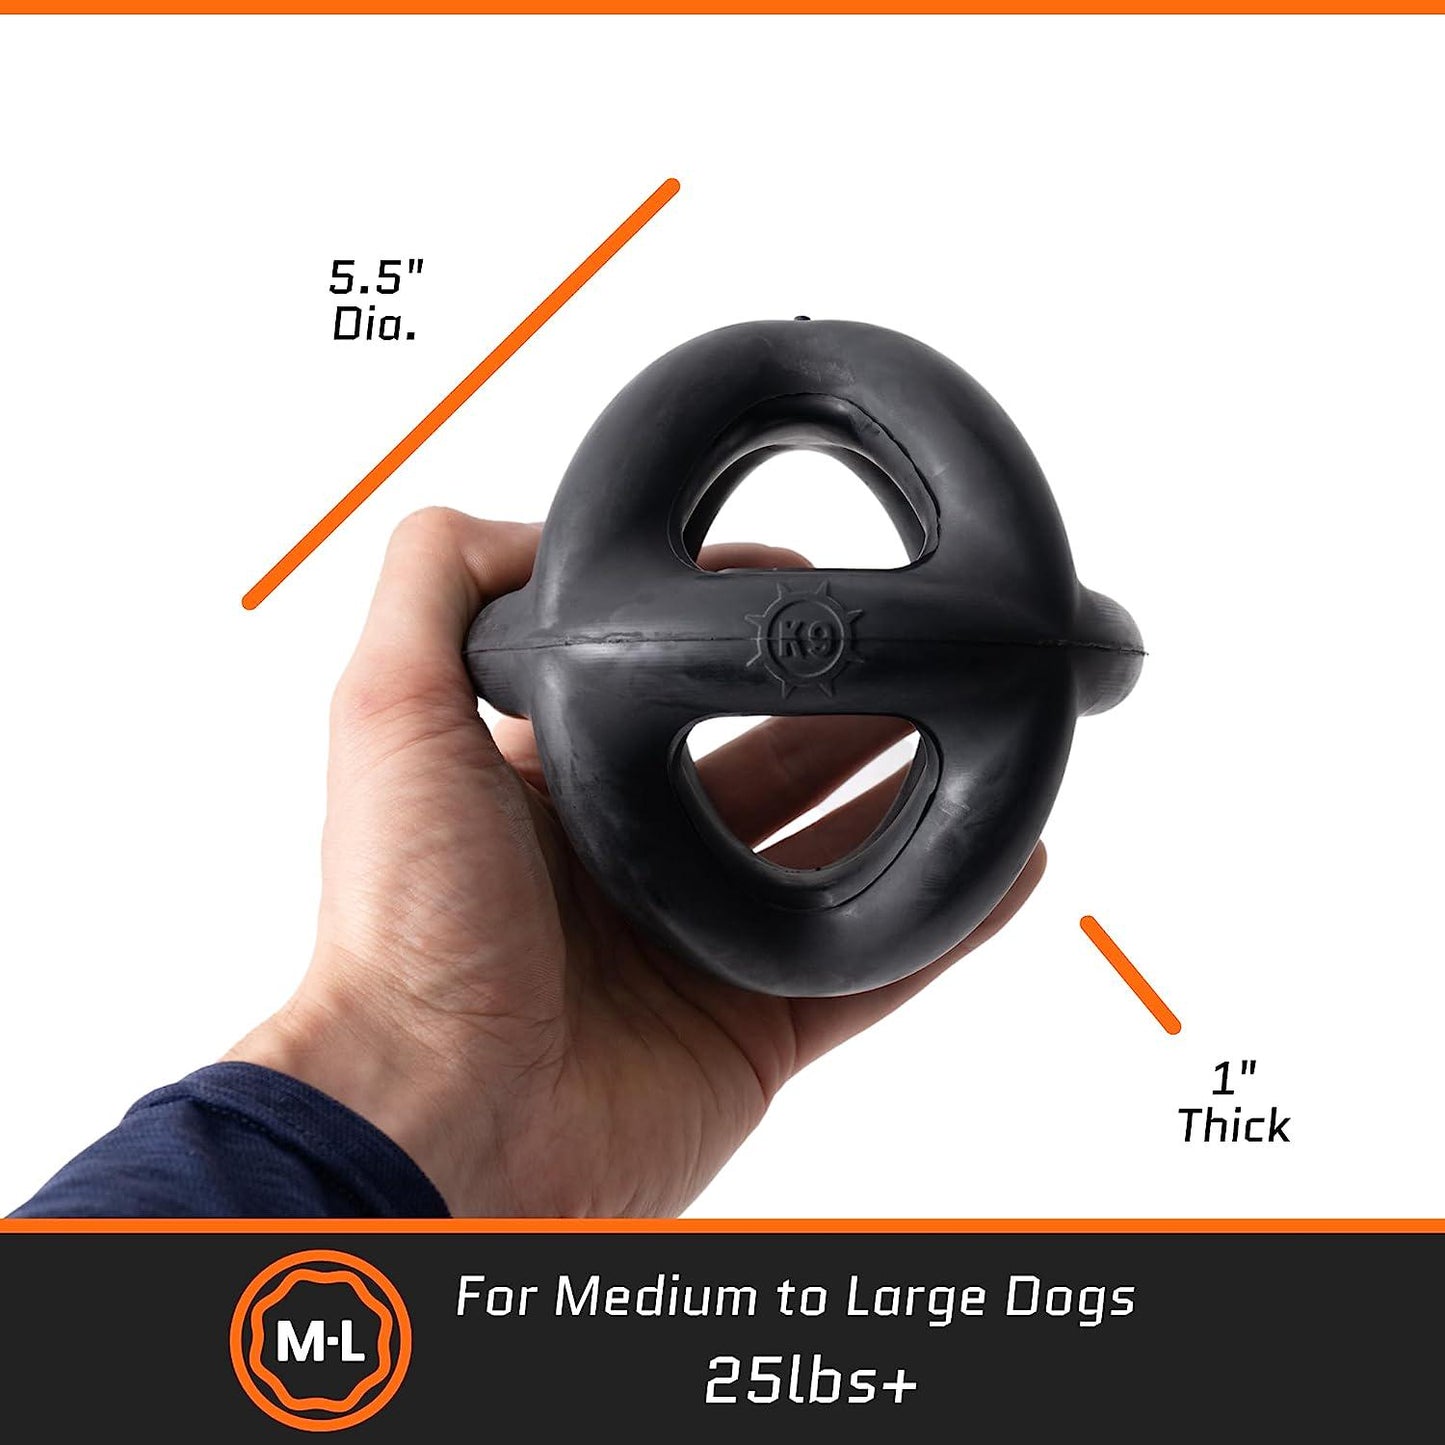 Ultra Durable RingBall - Lifetime Replacement Guarantee - for Medium and Large Dogs - Aggressive Chewers